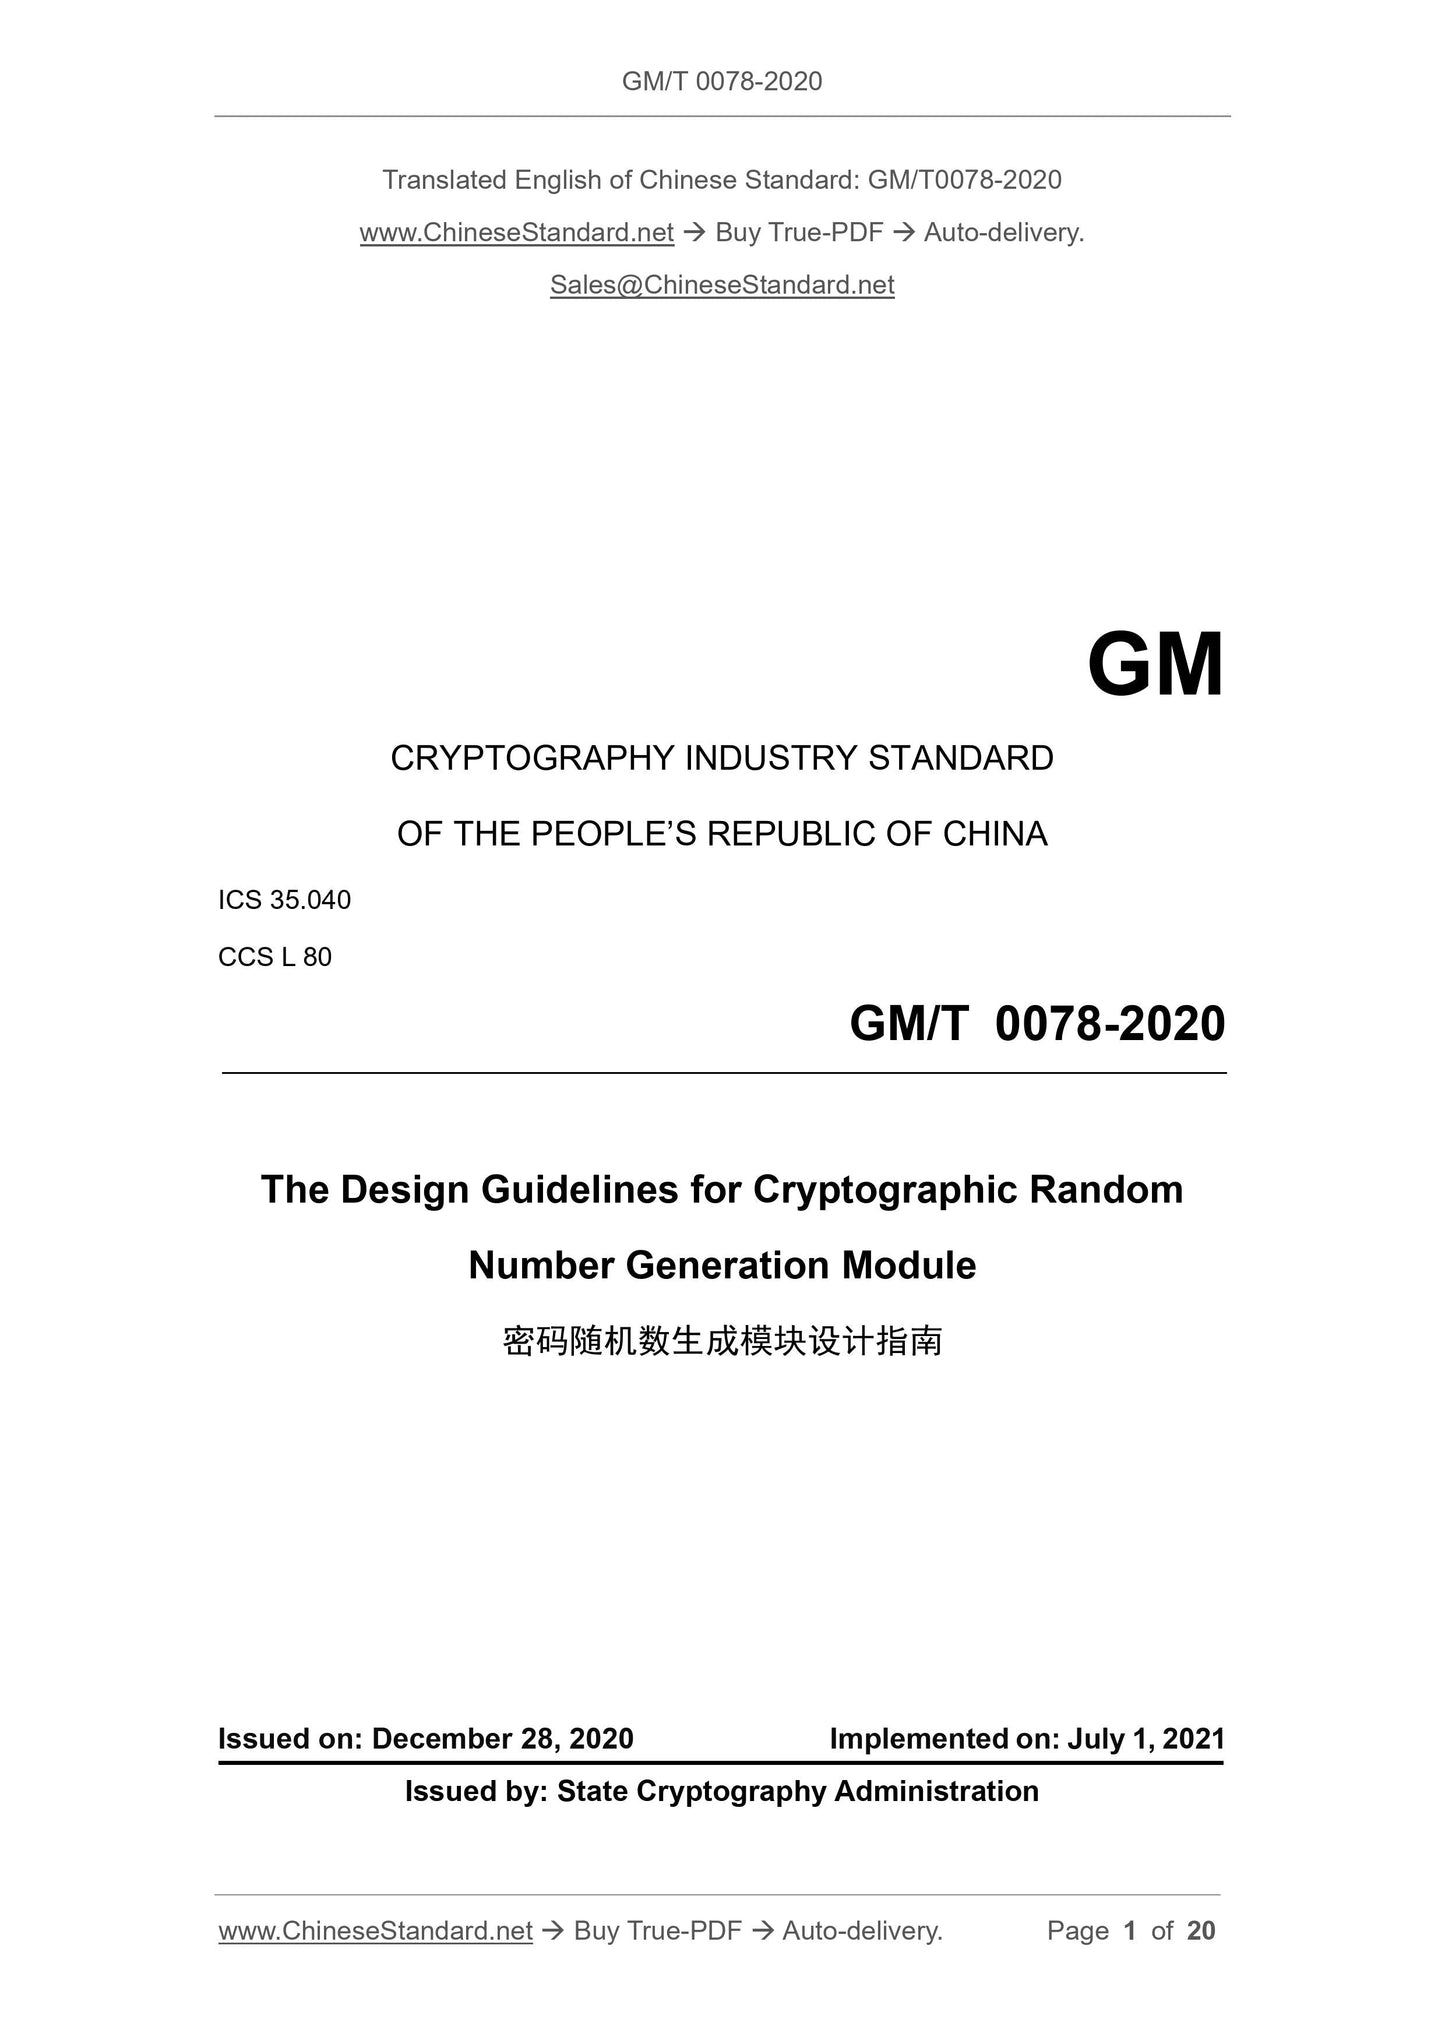 GM/T 0078-2020 Page 1